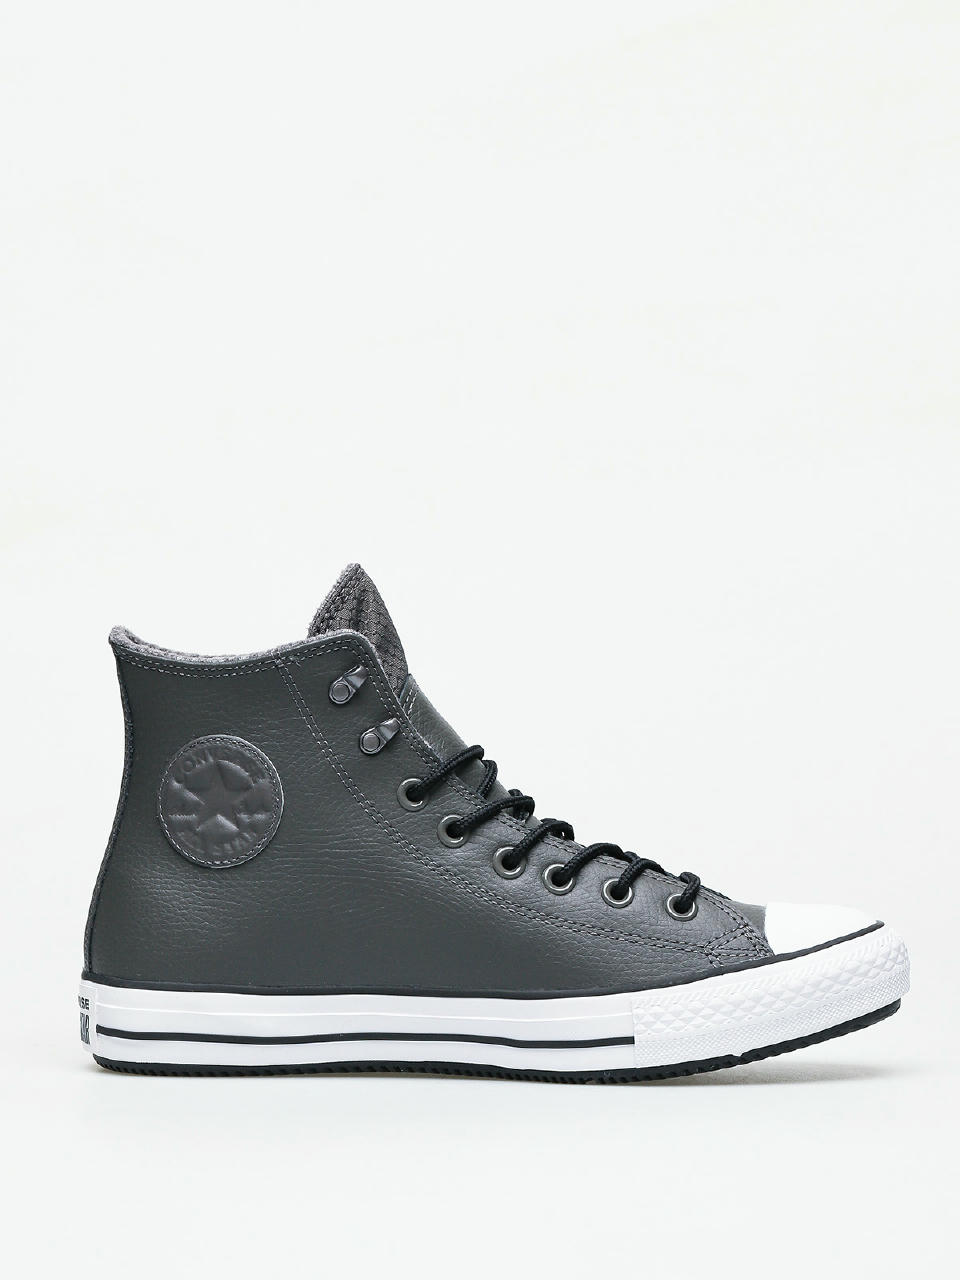 Converse Chuck Taylor All Star Hi Winter Leather (carbon grey /black/white)